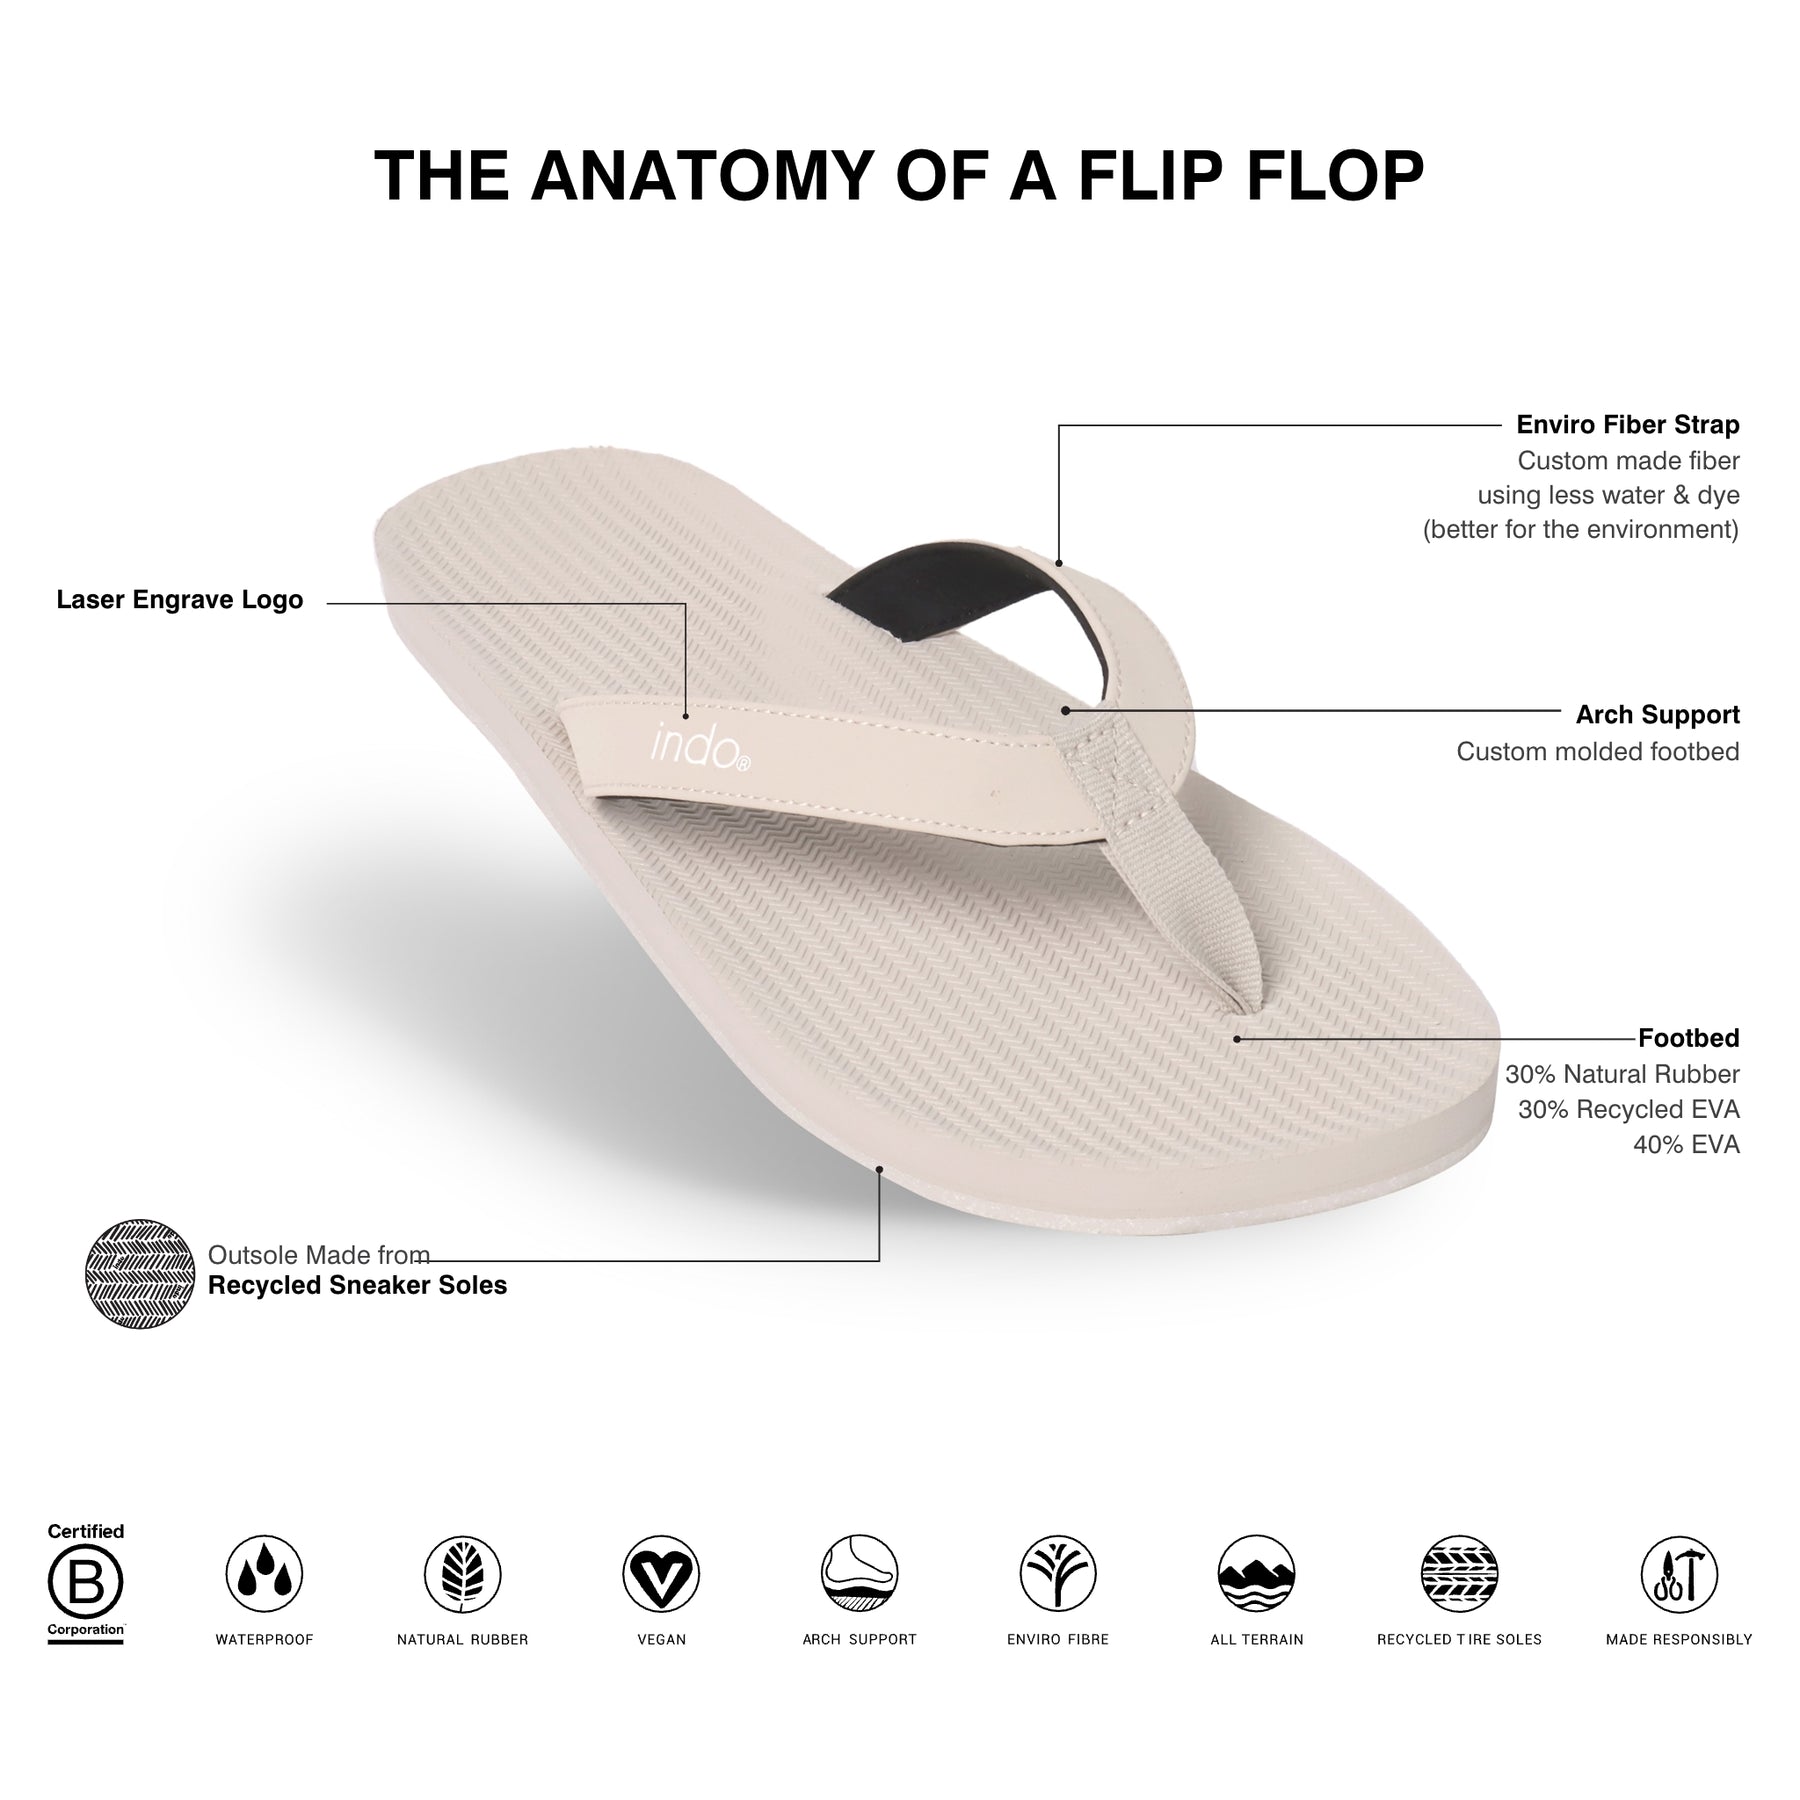 Description of the constructions of a pair of Men's White Flip Flops - waterproof top and non-slip white recycled sneaker sole